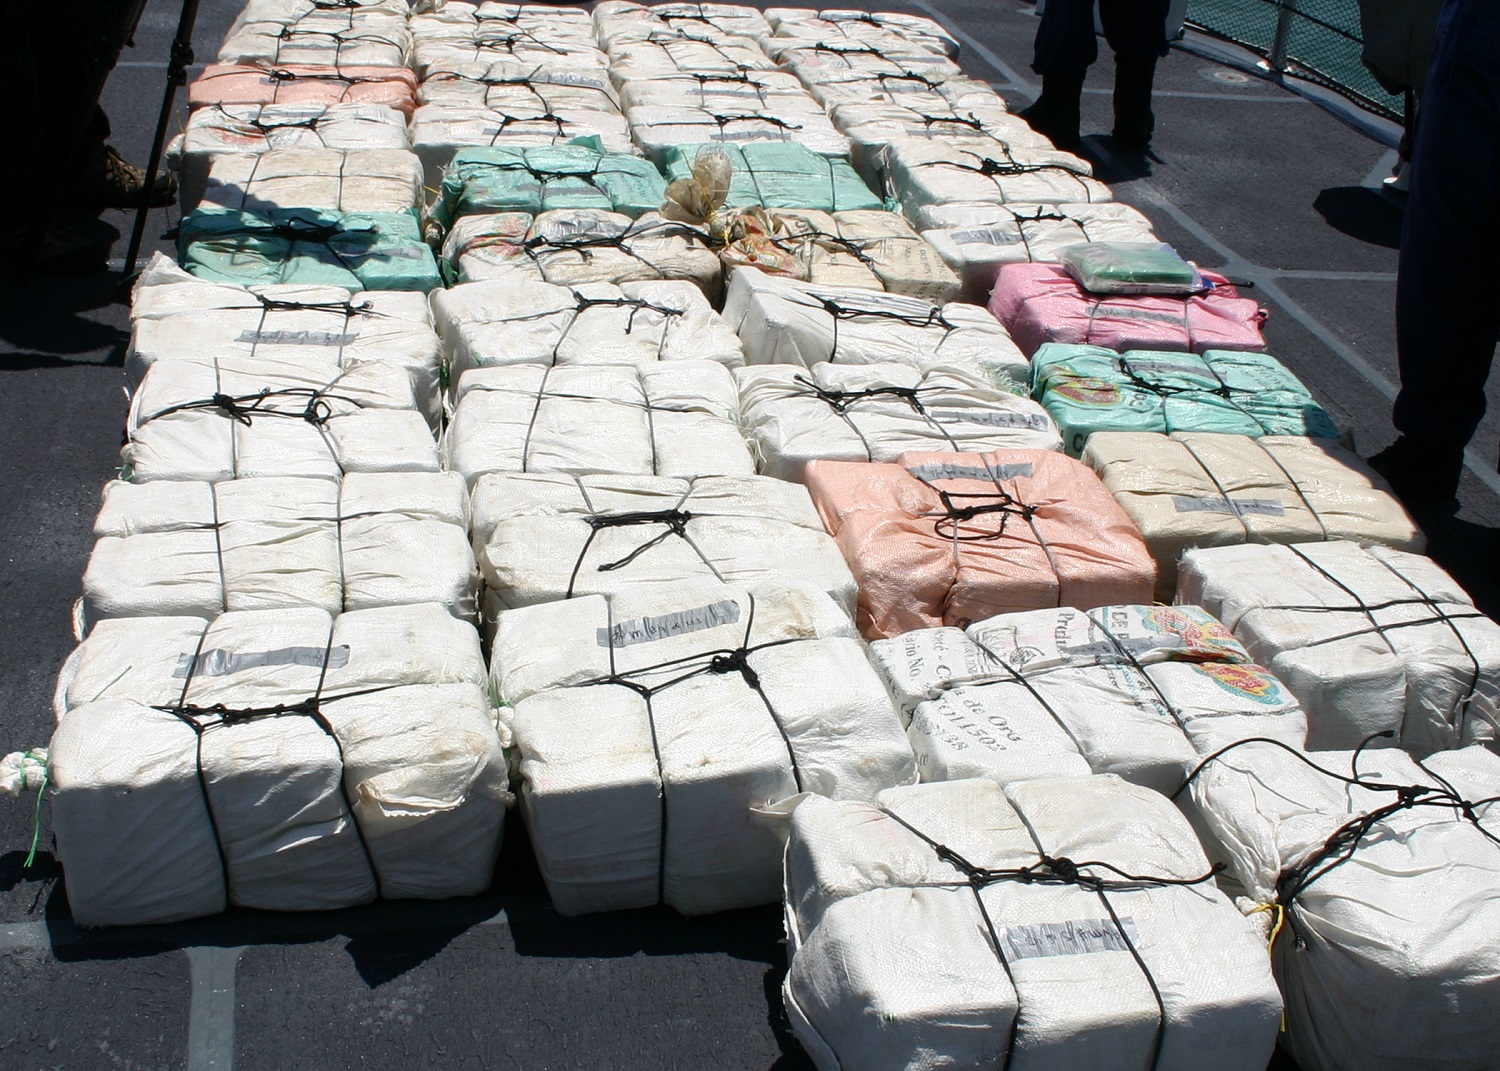 Tonne of cocaine discovered in car shipments from Brazil: Senegal customs